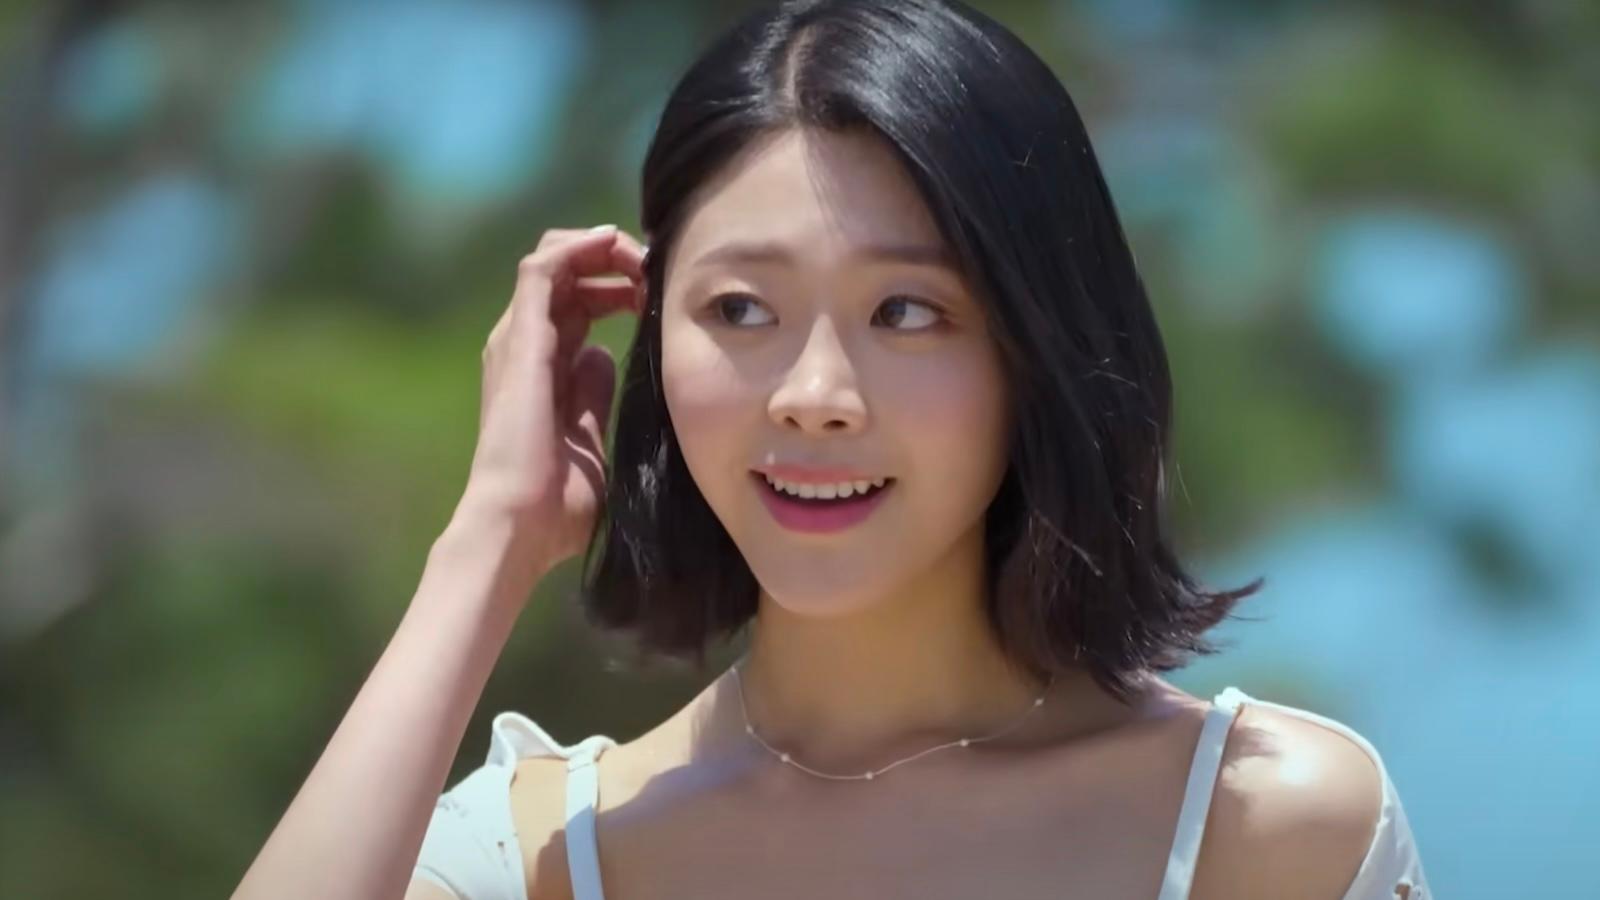 Netflix drops trailer for Korean reality dating series 'Single's